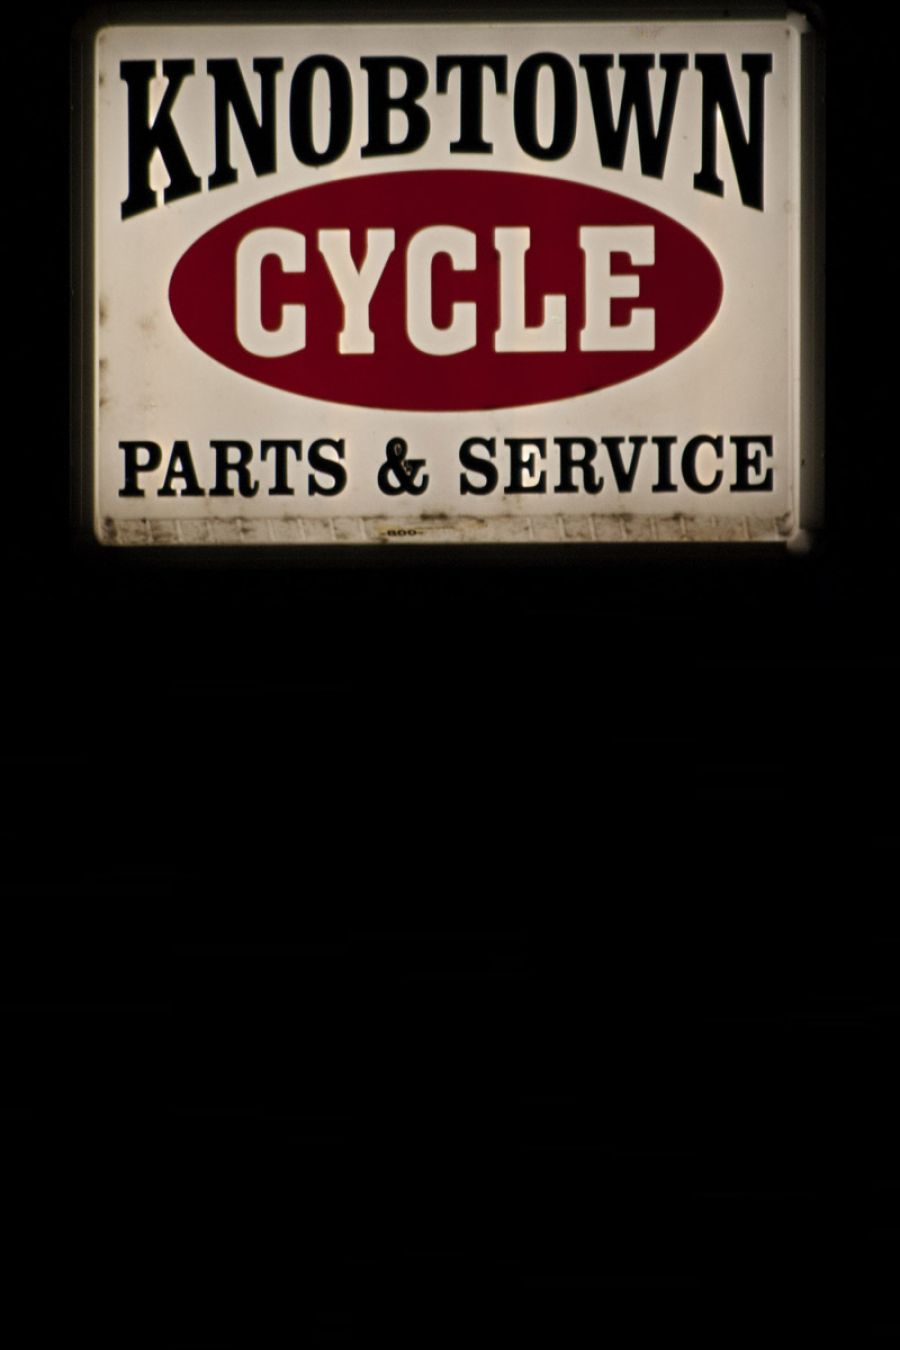 Knobtown Cycle, Kansas City&#8217;s Motorcycle Shop, Knobtown Cycle